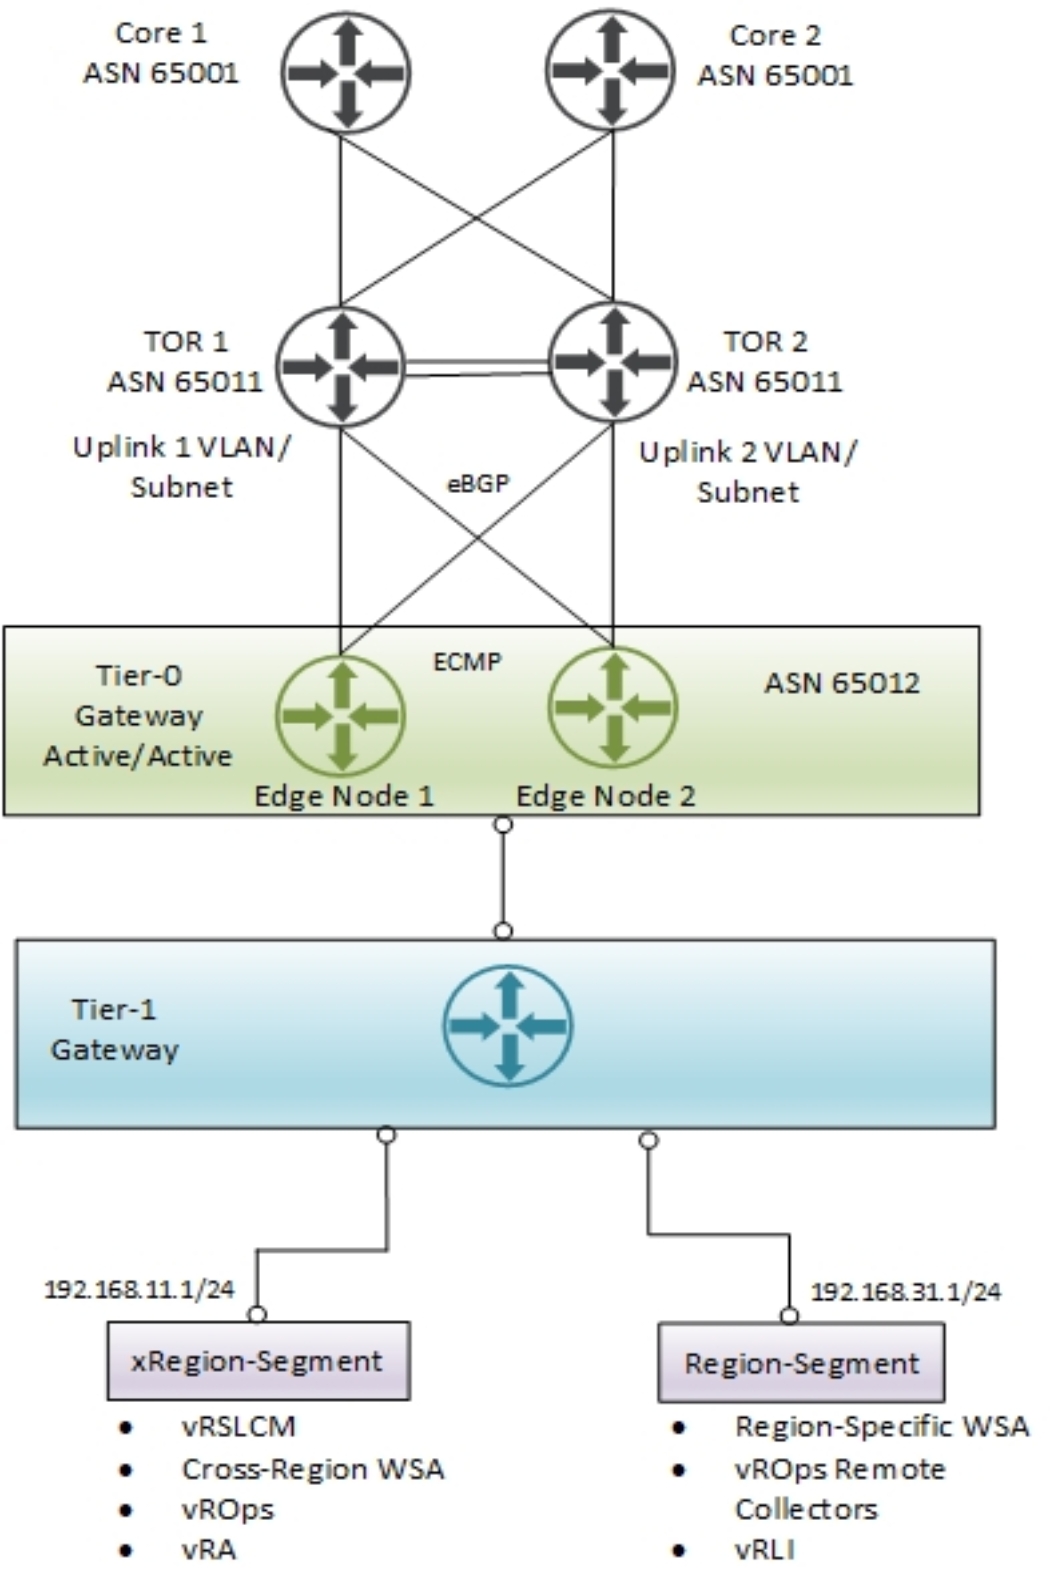 This figure shows an NSX Edge north-south routing design.